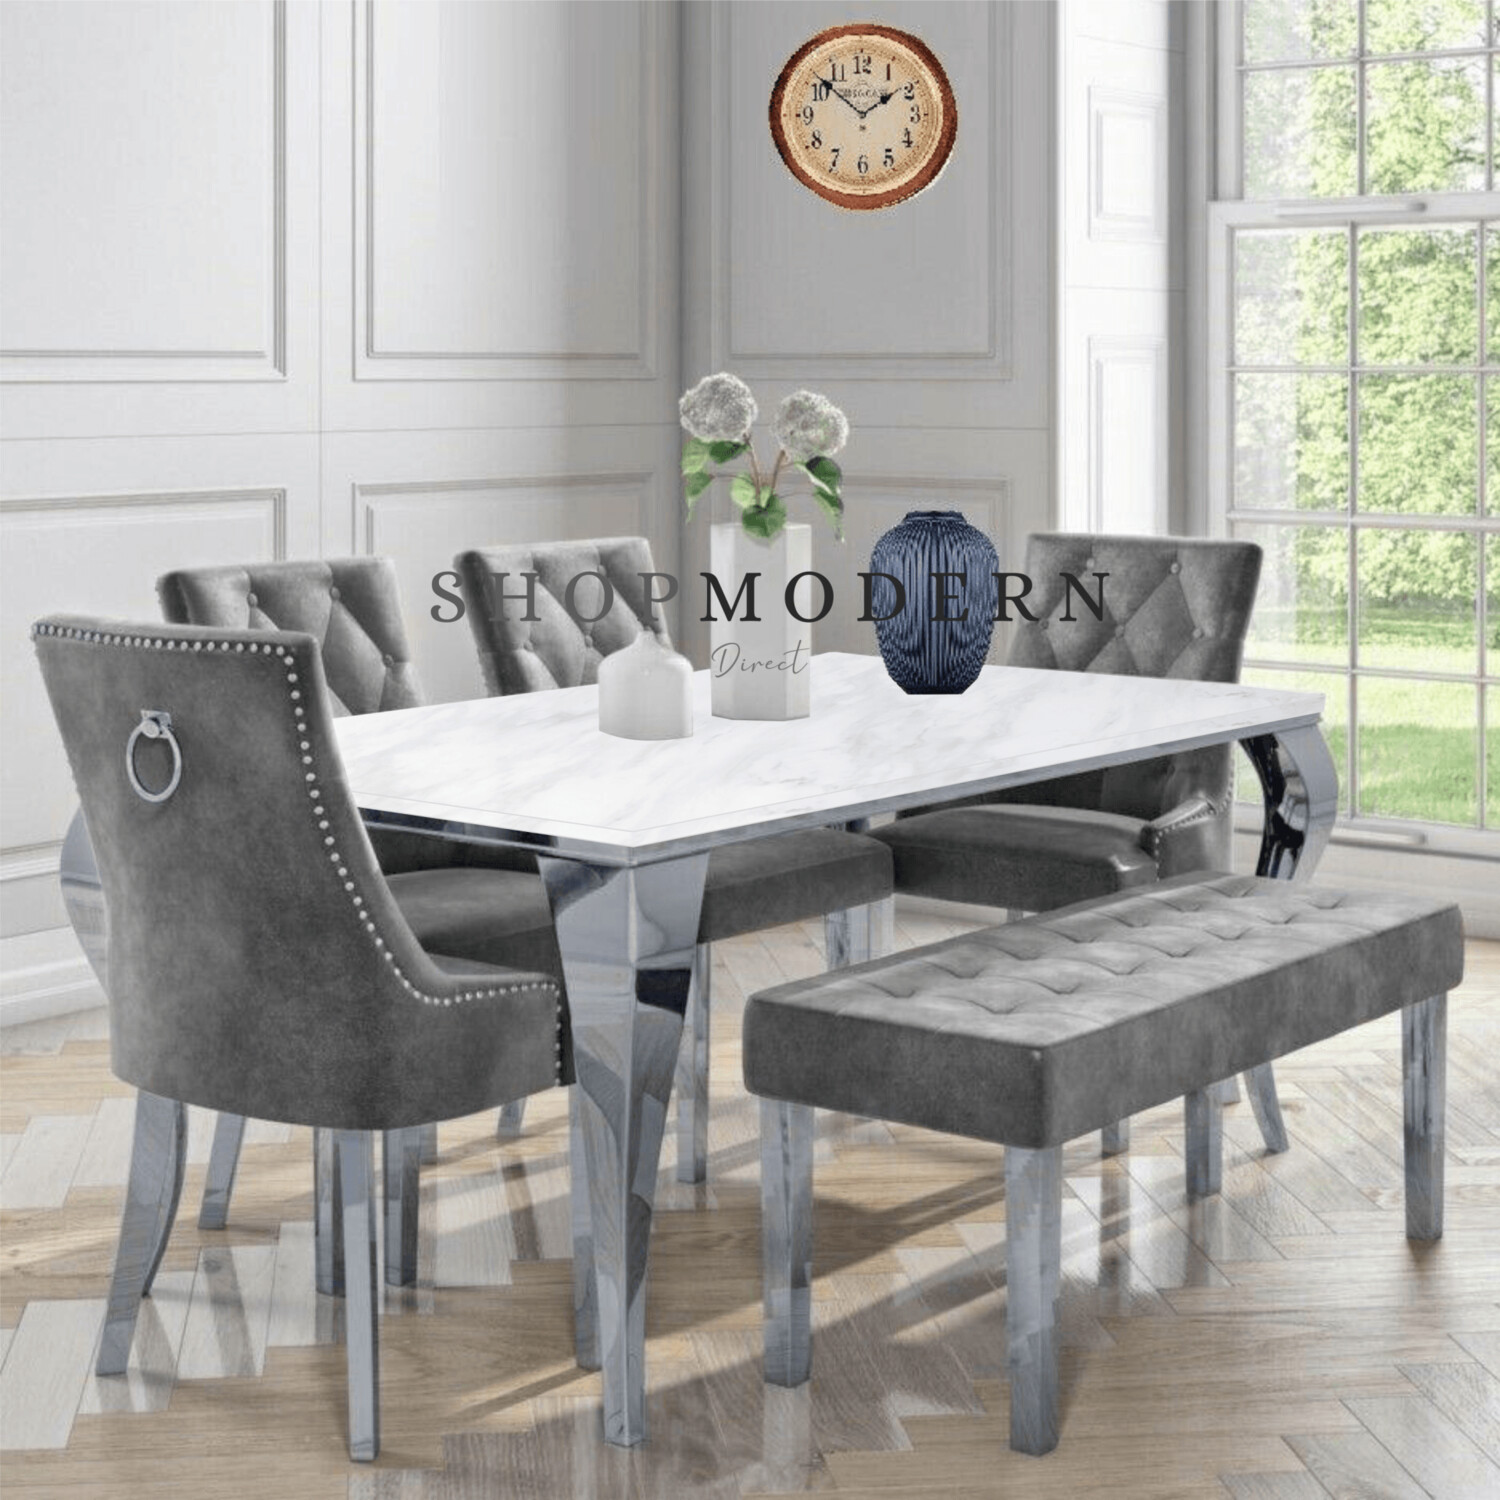 Laveda 160cm White & Grey Marble Dining Table + Canterbury Chairs Bench